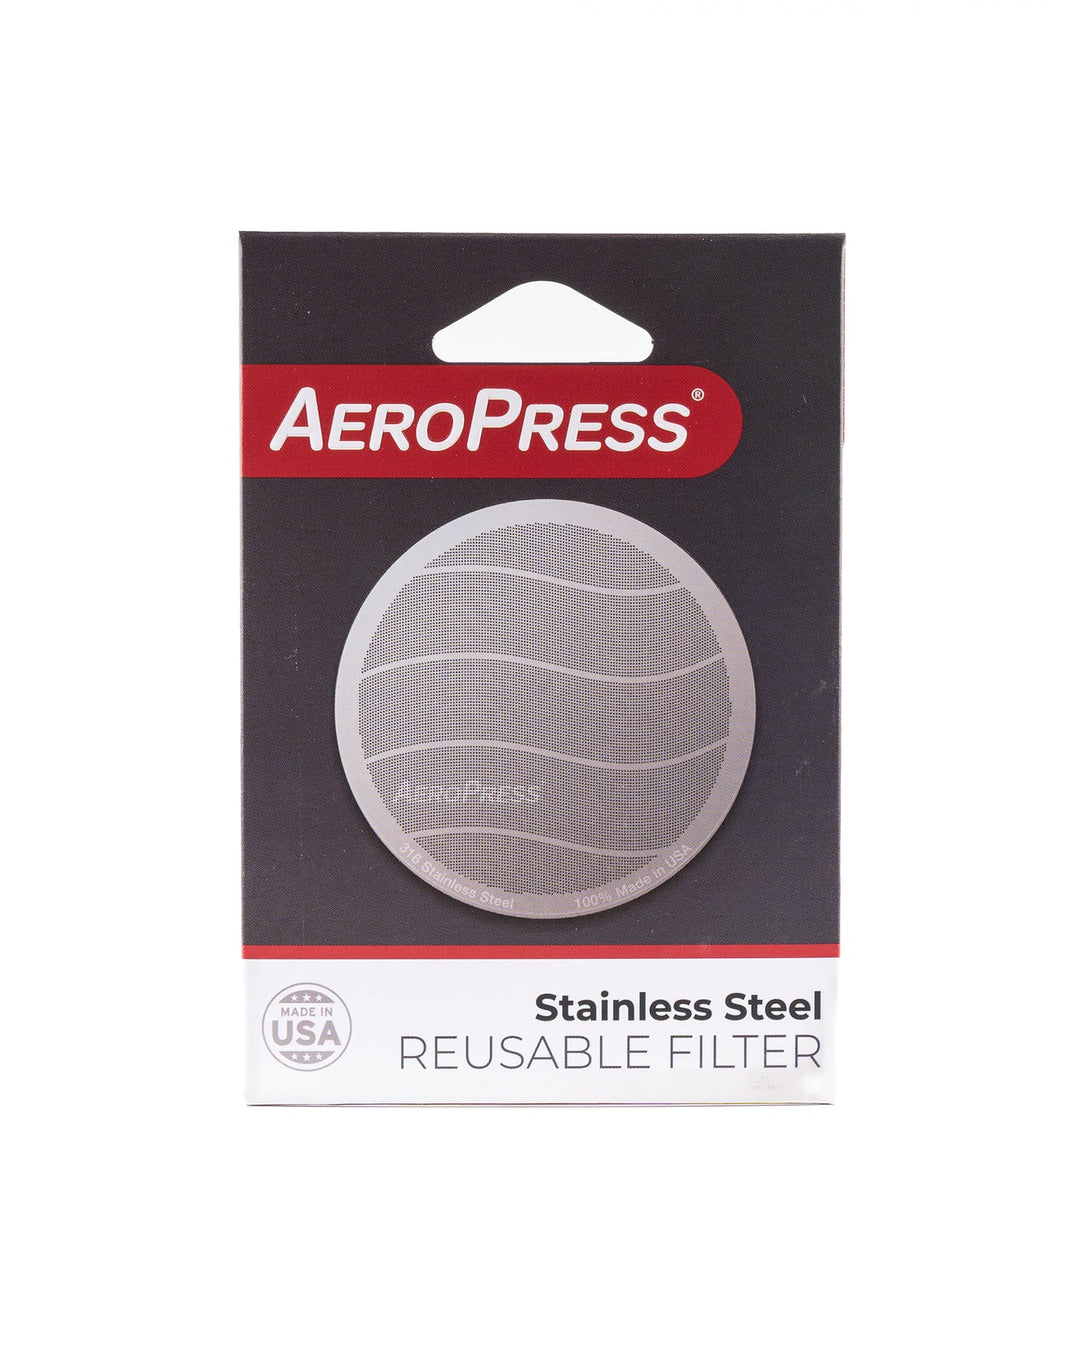 AeroPress Stainless Steel Reusable Coffee Filter The You Barista Coffee Company UK London Surrey